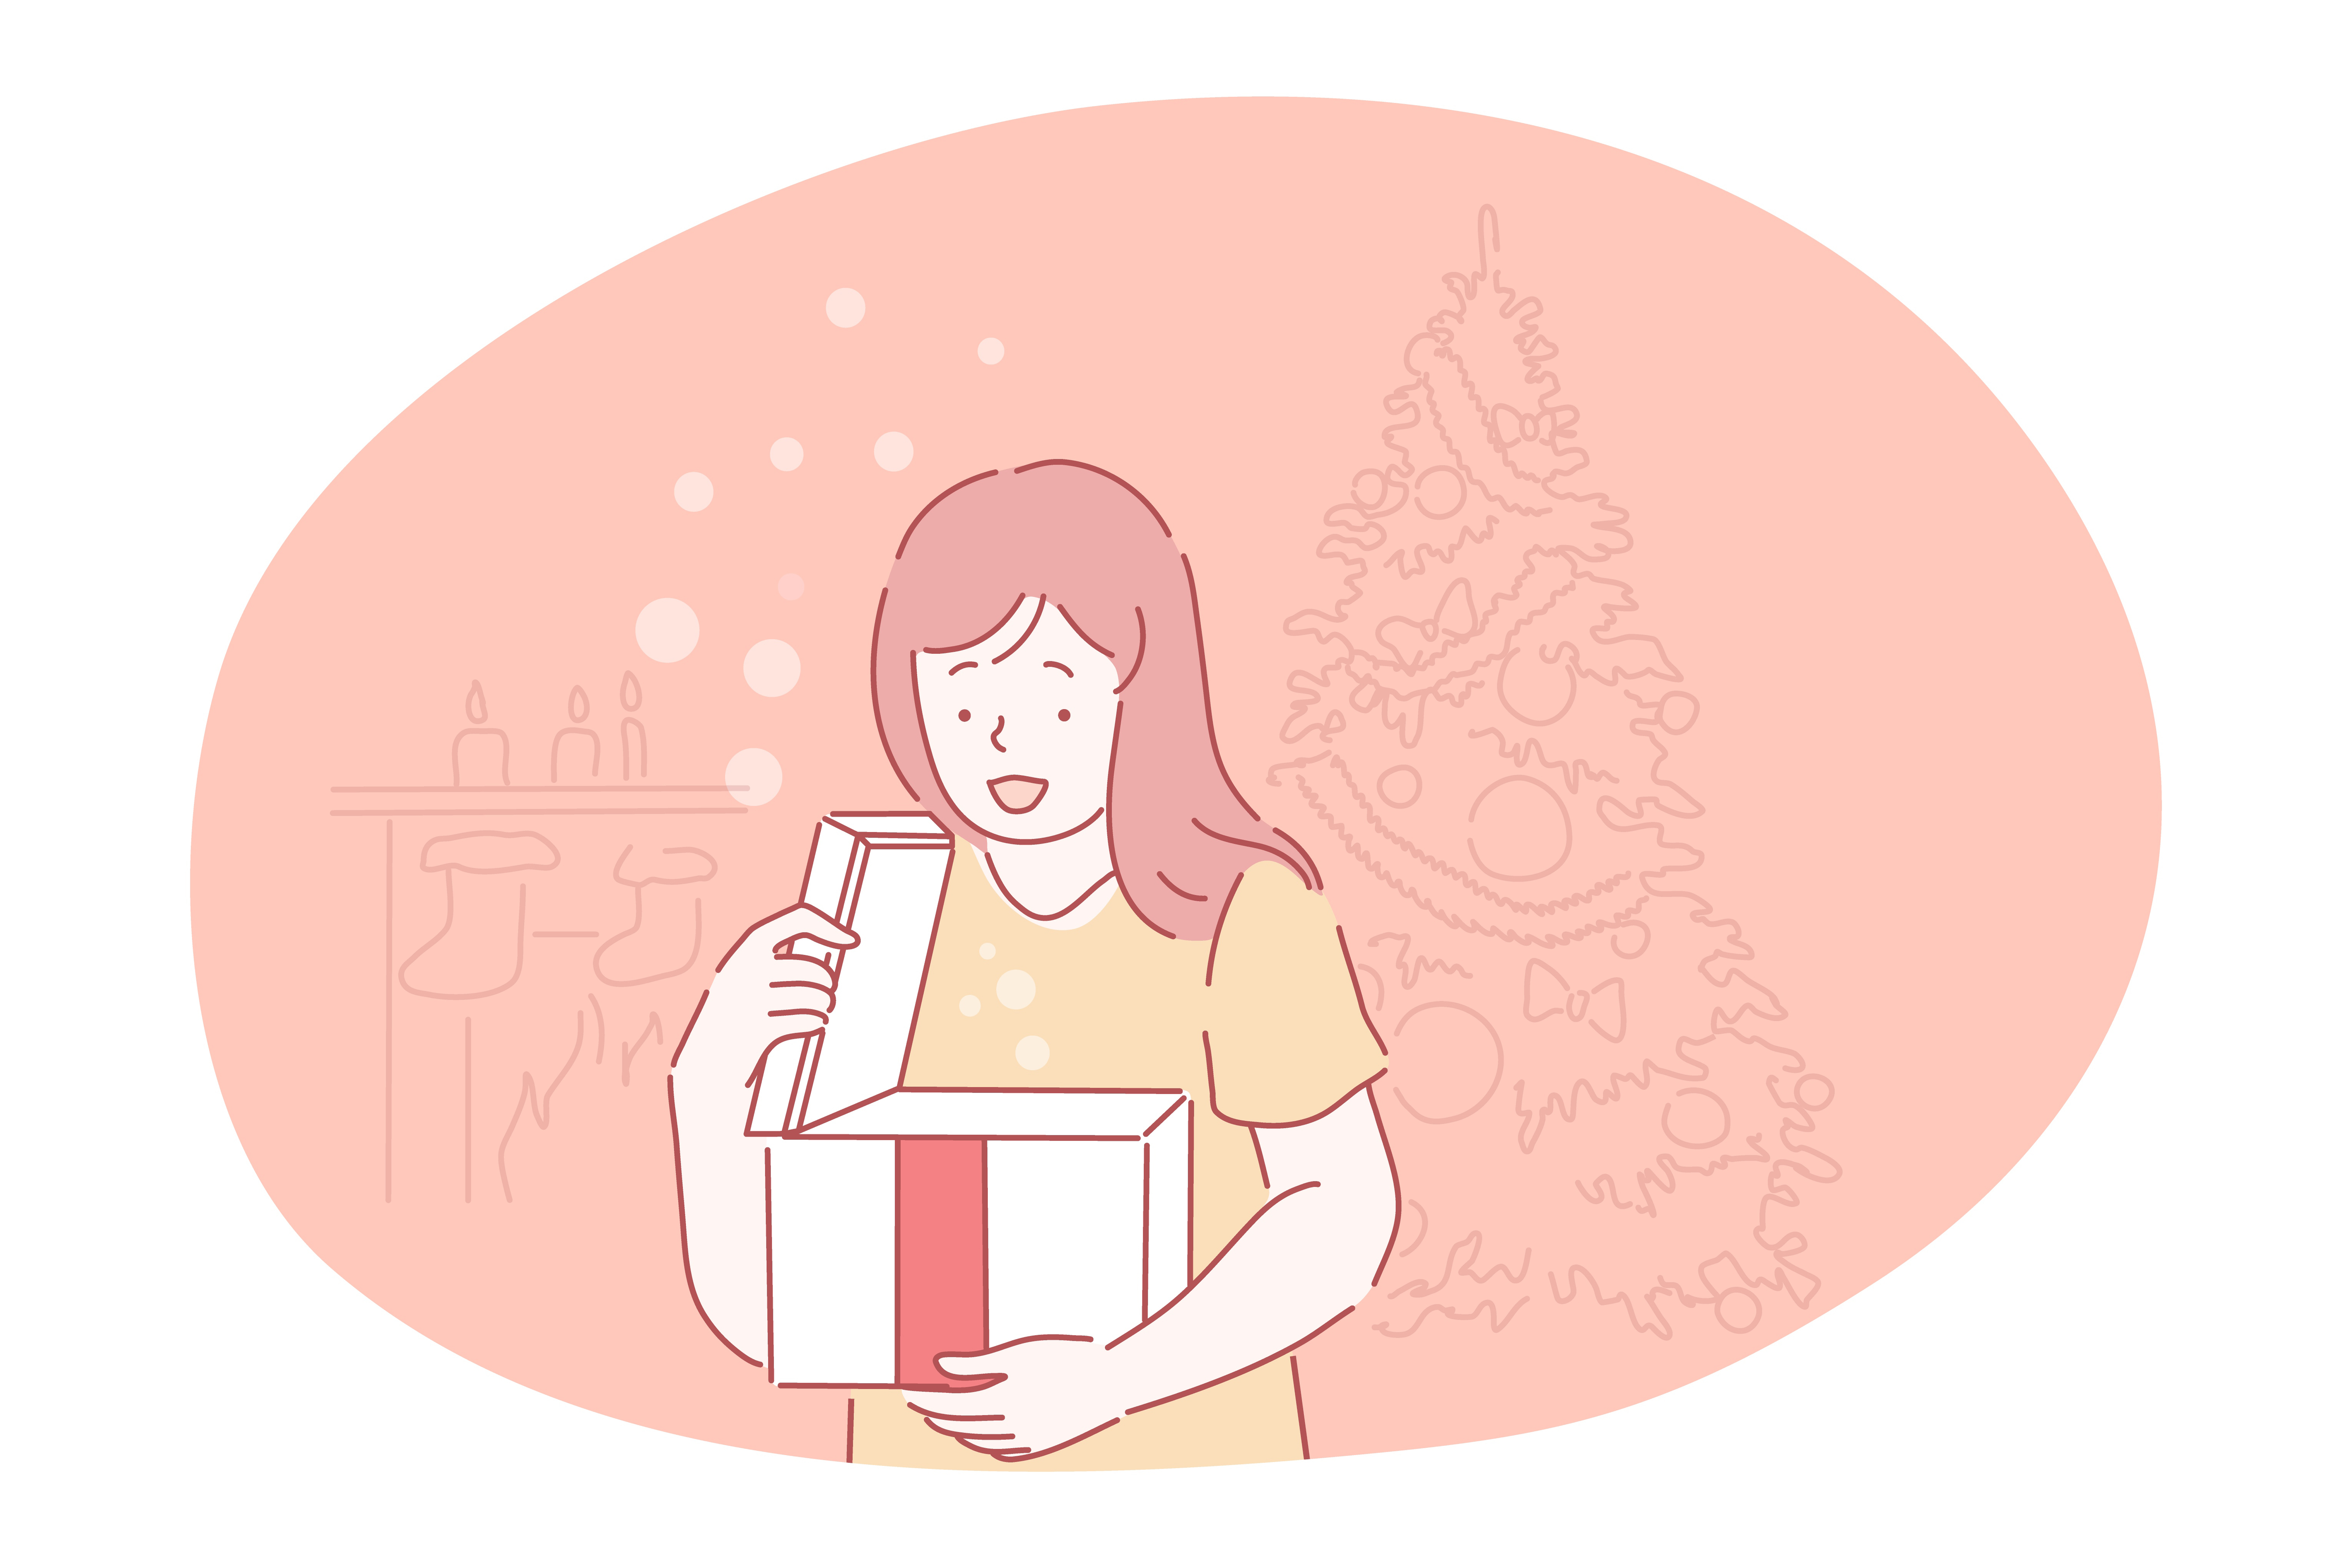 Christmas present, gift, celebration of New Year and winter holidays concept. Small girl cartoon character standing feeling surprised opening box with holiday Christmas present box with red ribbon. Christmas present, gift, celebration of New Year and winter holidays concept